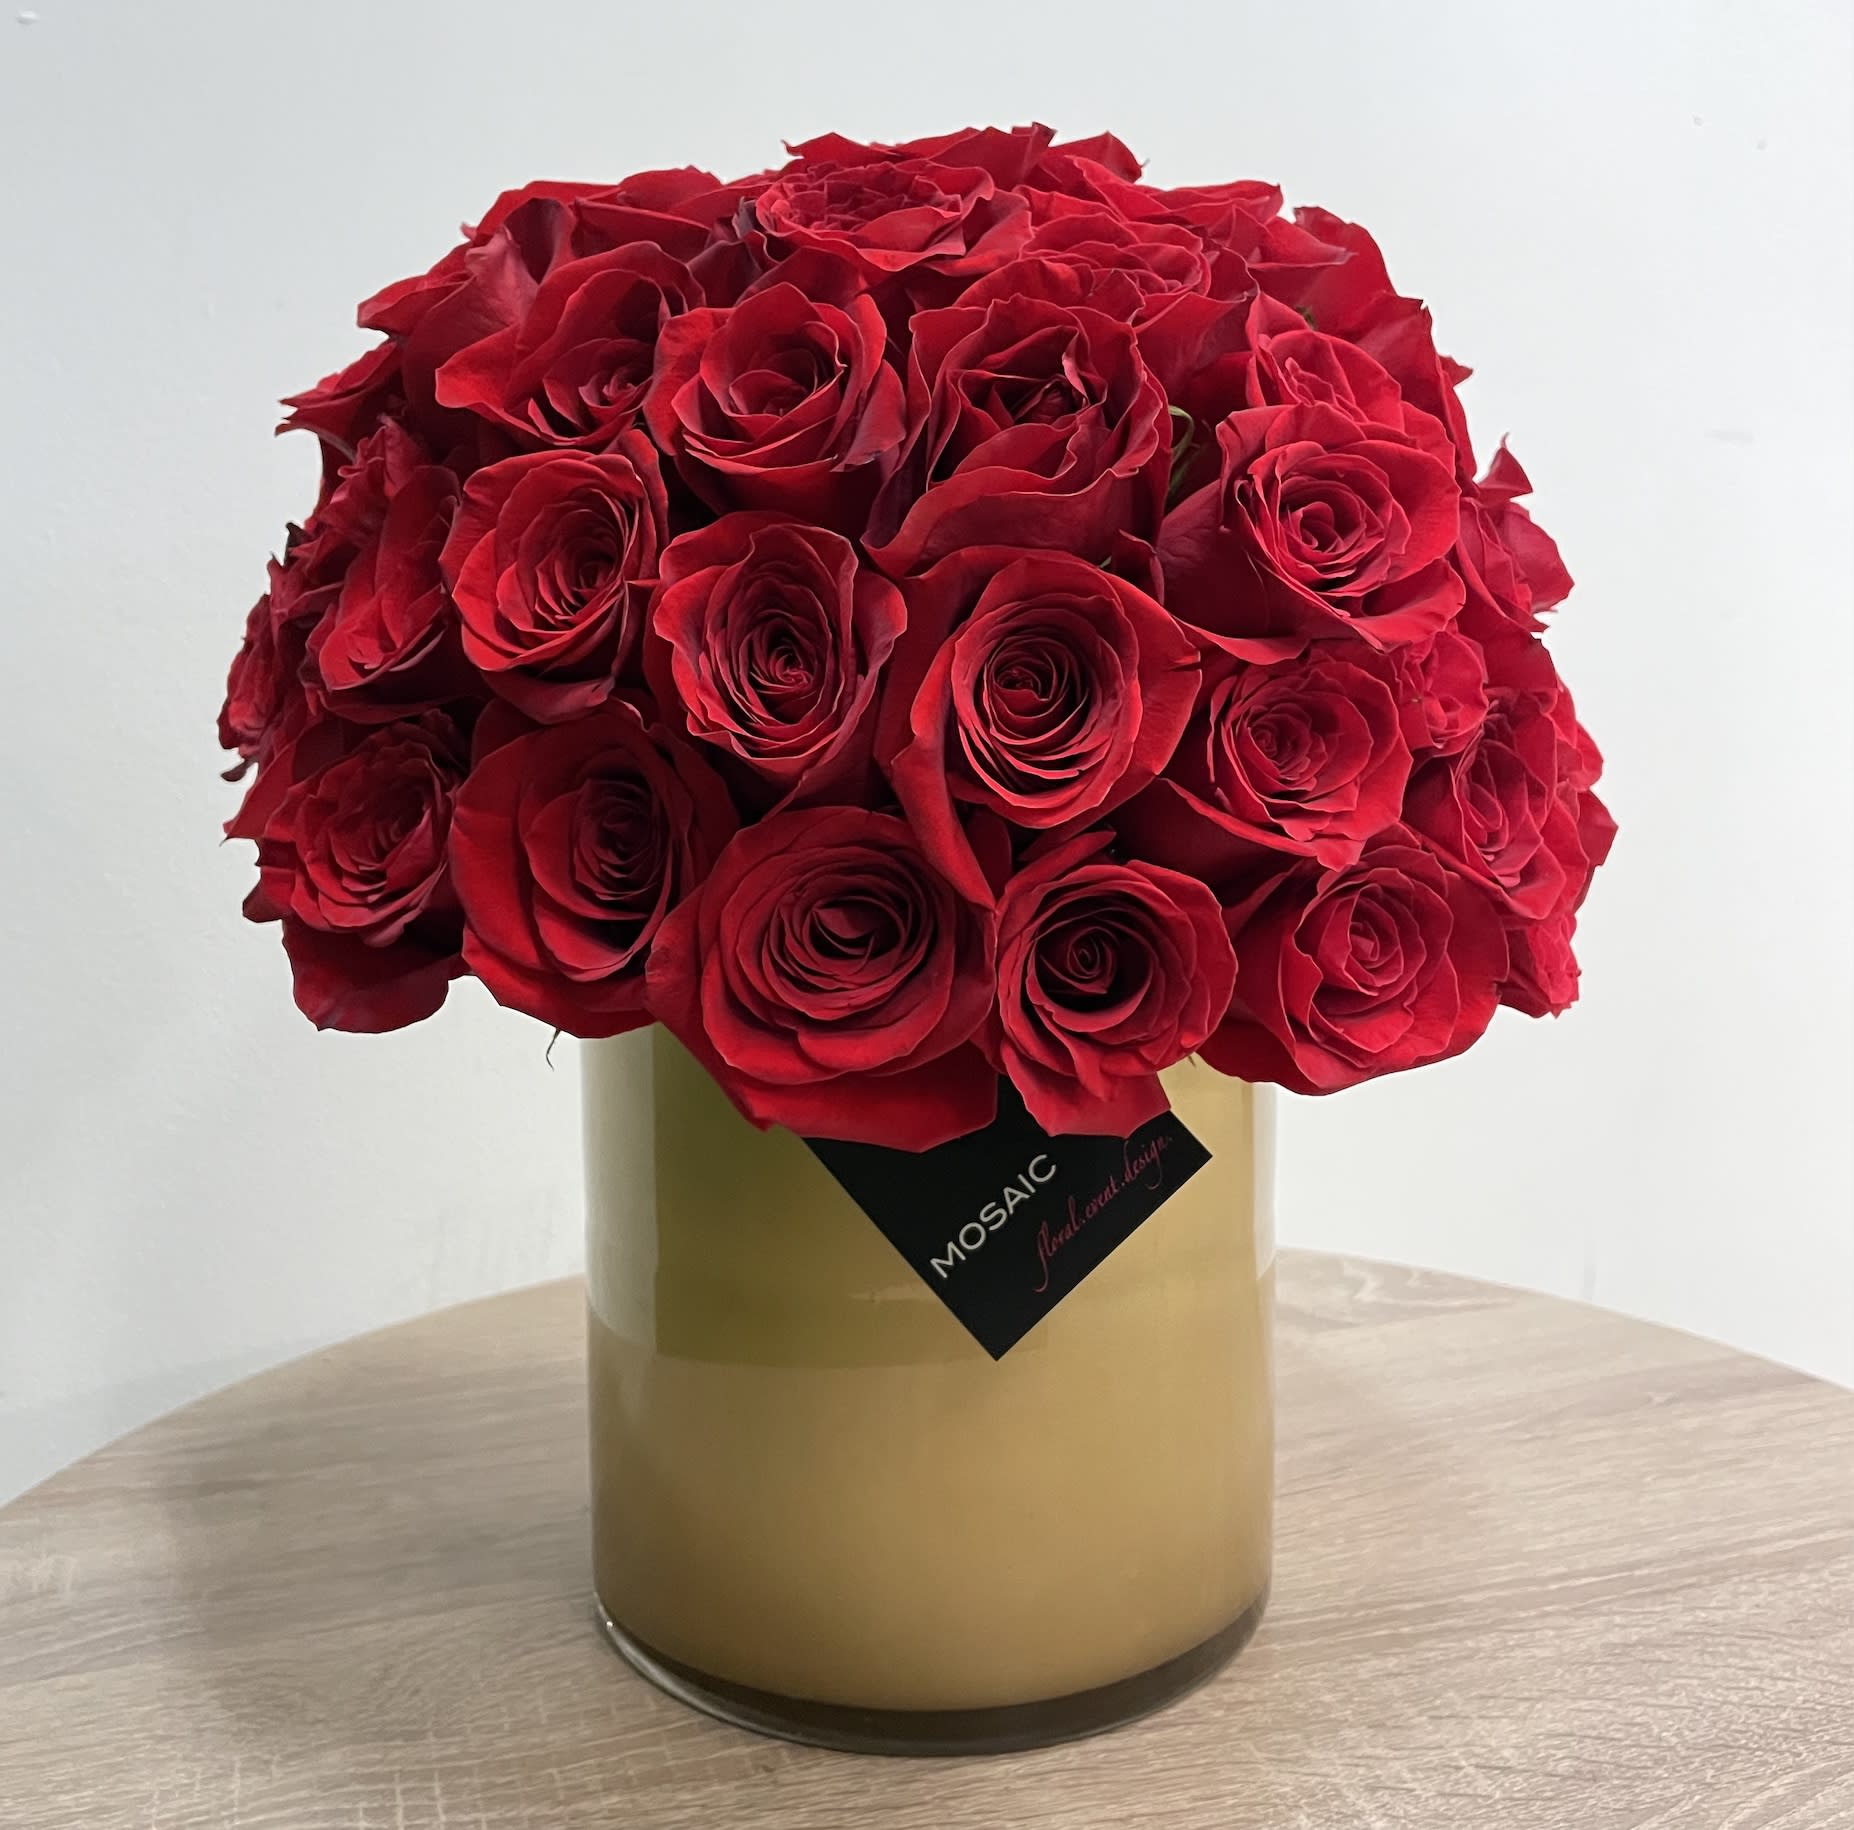 Hollywood Glam - 50 red roses arranged in an 6&quot; diameter custom painted gold vase. The arrangement stands at about 12&quot; high.